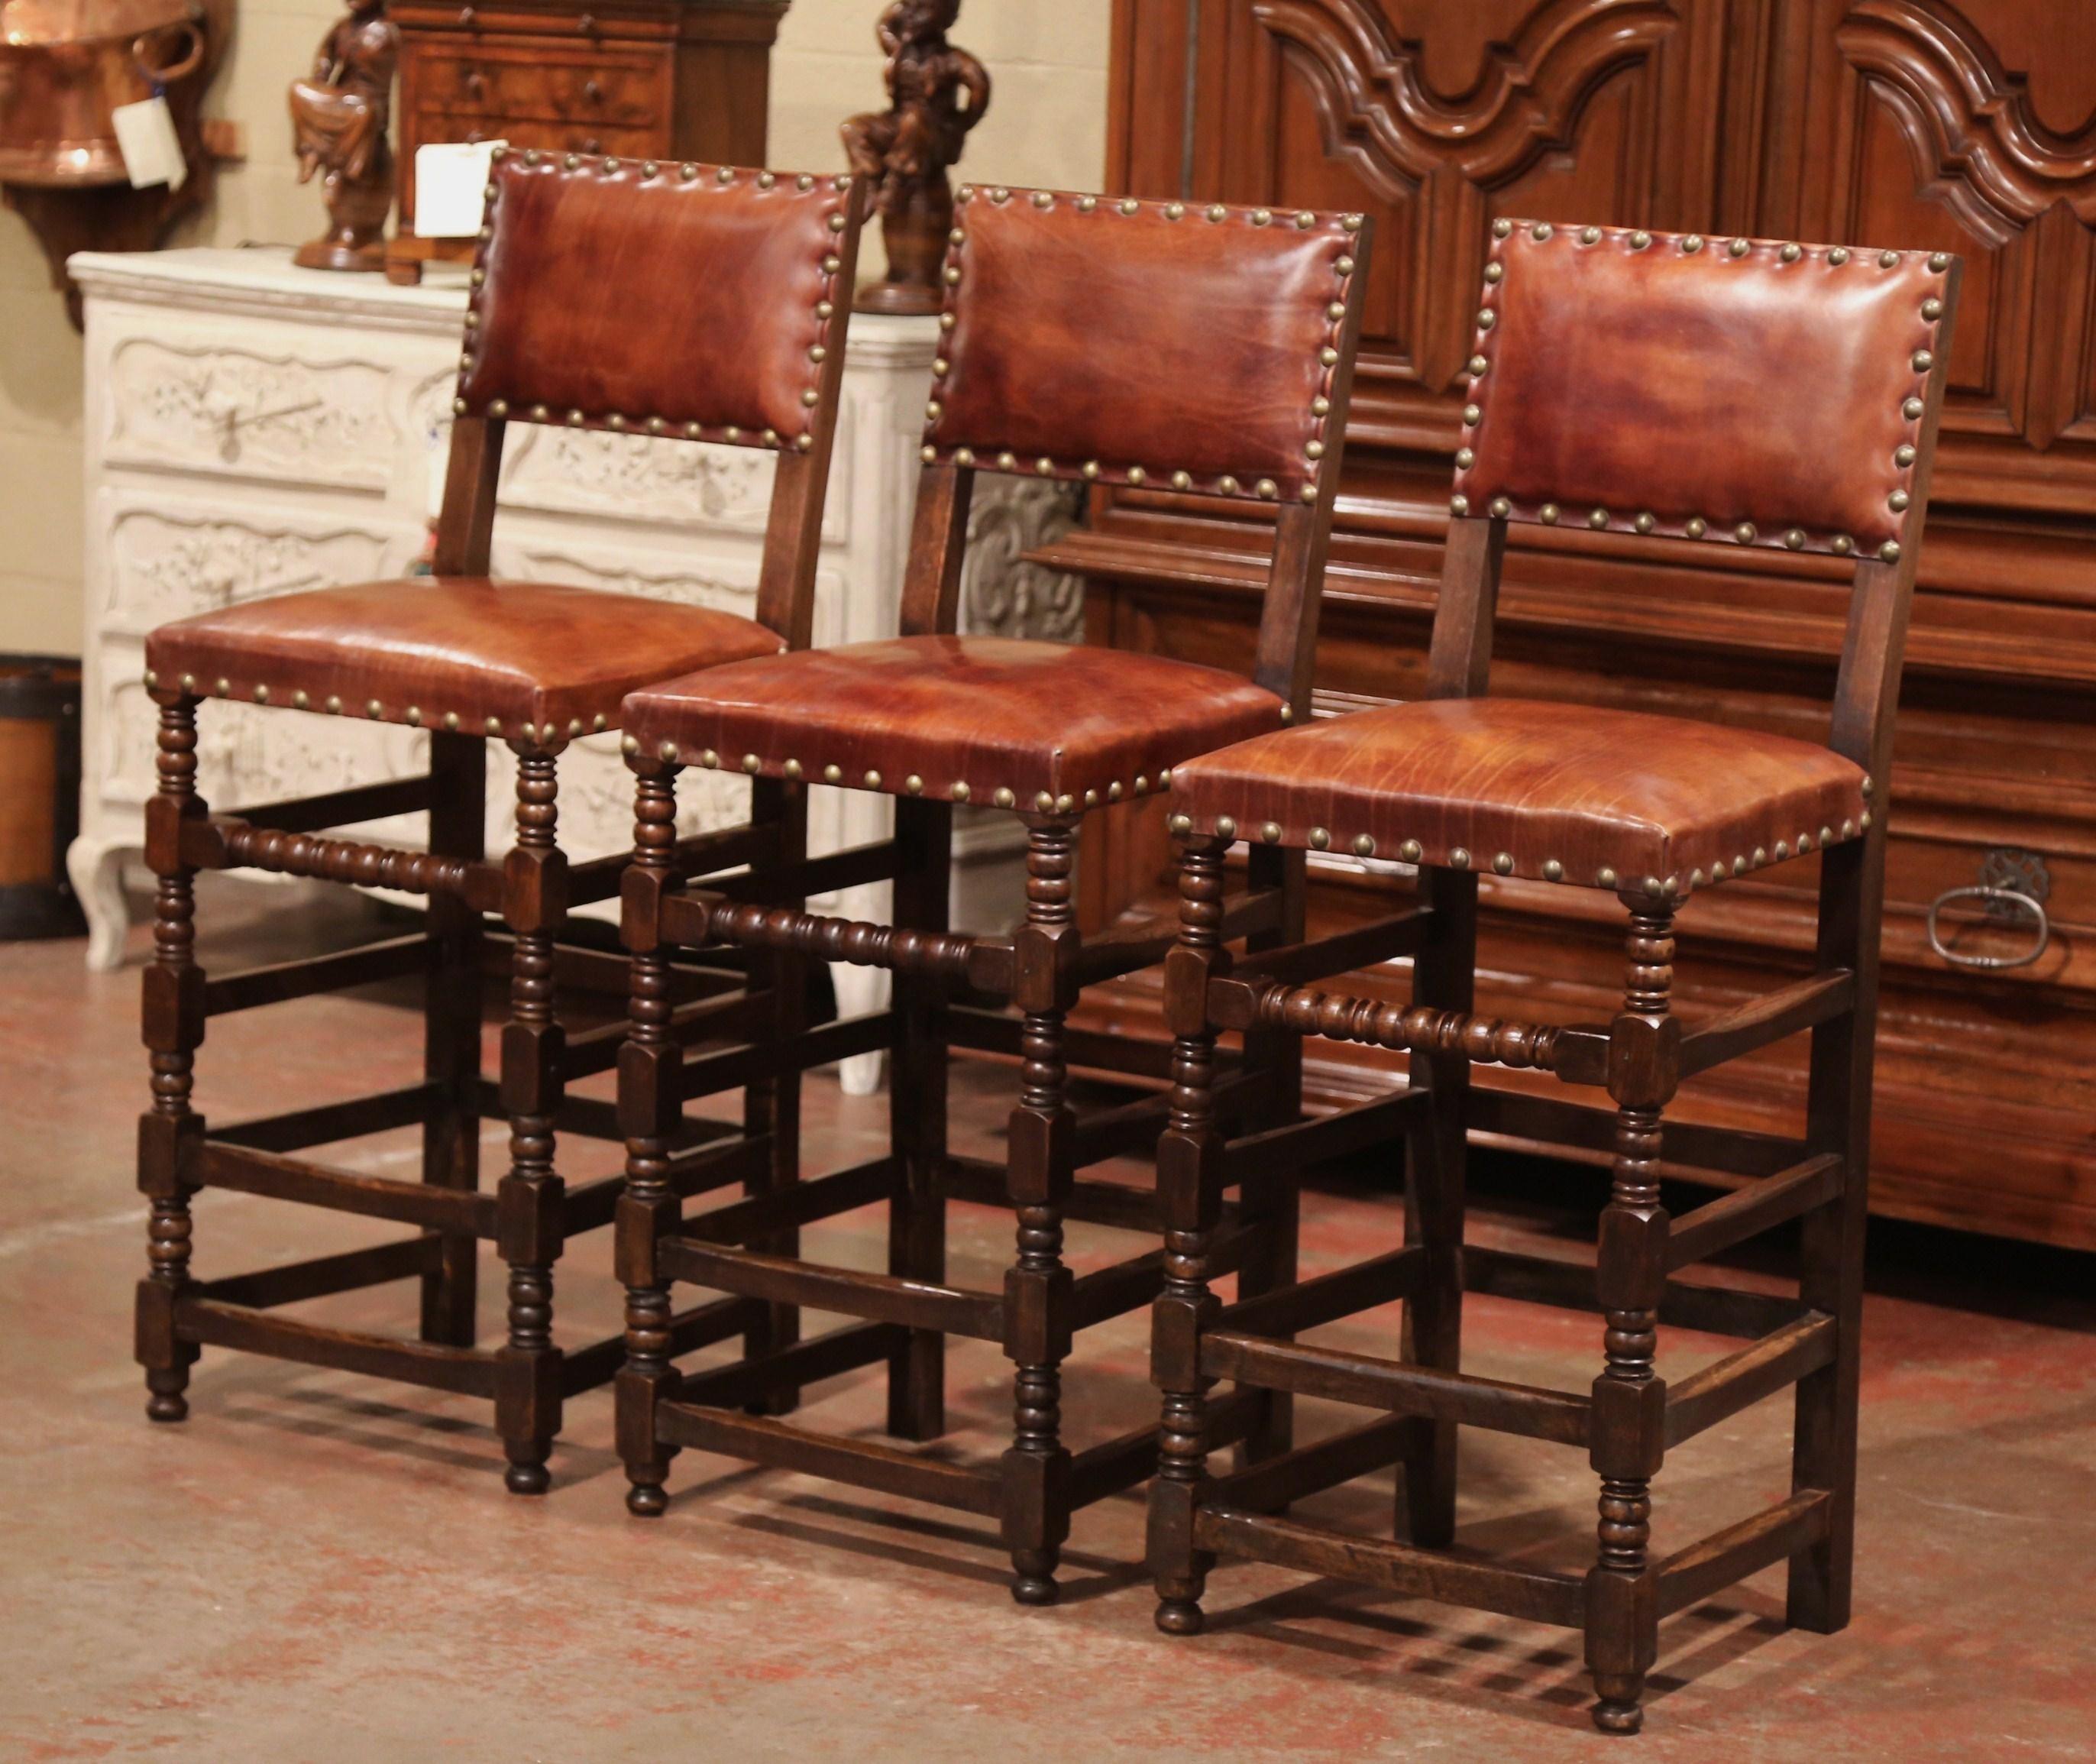 Add a Gothic look to your bar or kitchen counter with this elegant set of three antique stools. Crafted in France circa 1890, the traditional barstools are the perfect height for a 42 to 45